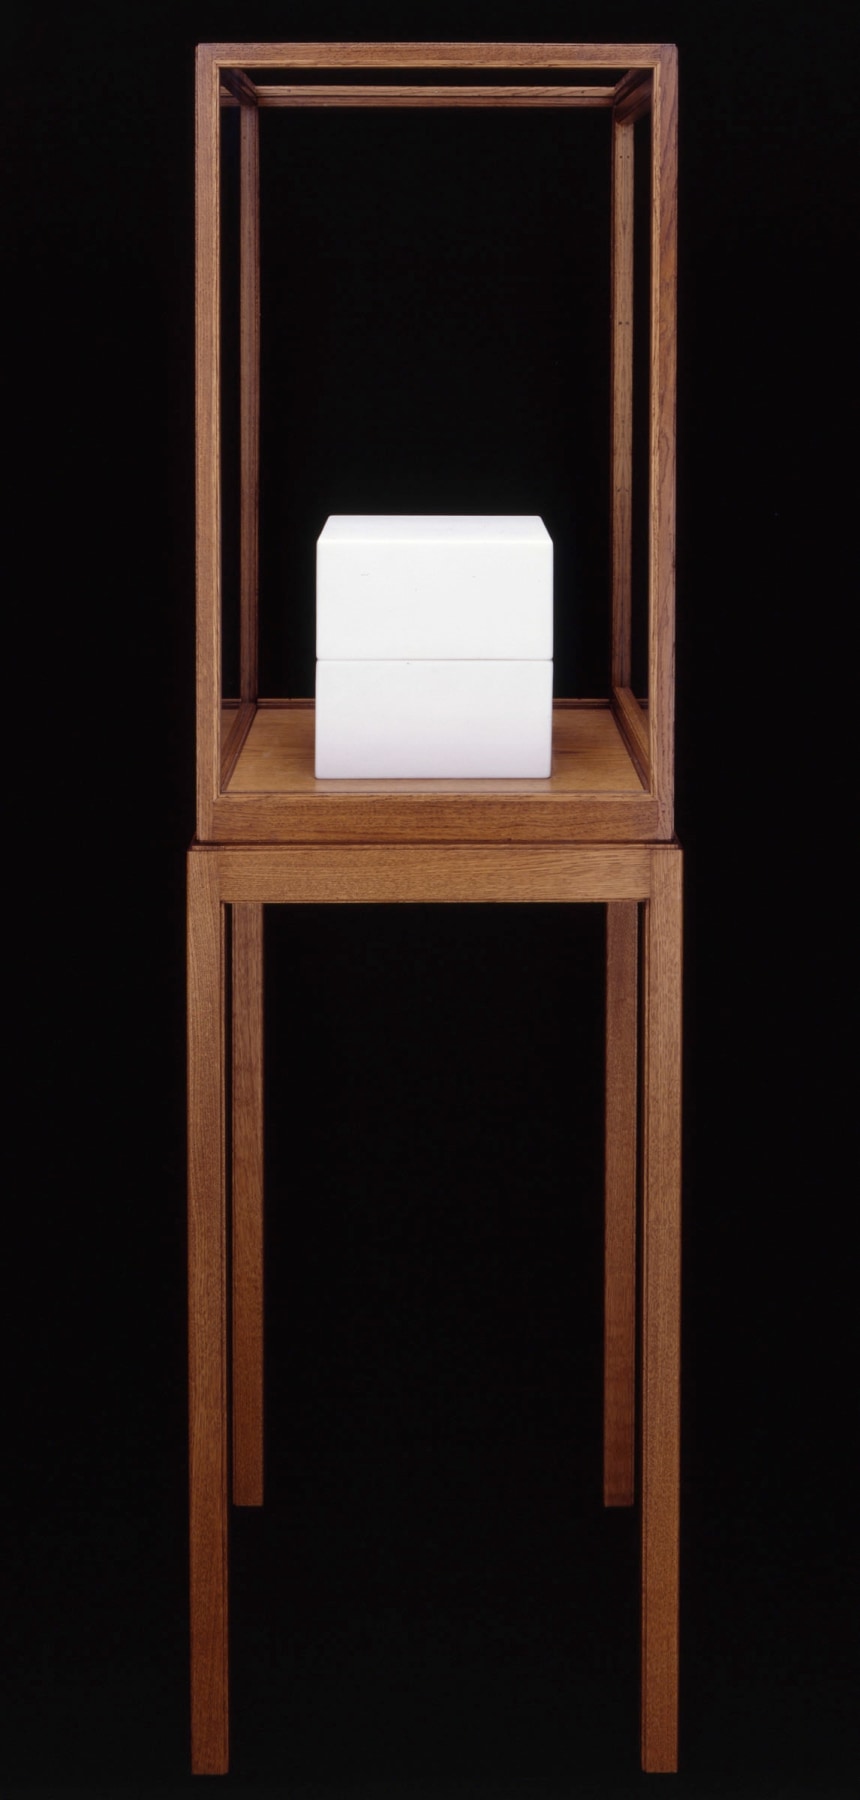 James Lee Byars

&amp;ldquo;The Cube Book&amp;rdquo;, 1989

Marble

Two parts, overall:

9 3/4 x 9 3/4 x 9 3/4 inches

25 x 25 x 25 cm

JB 123/2

$200,000